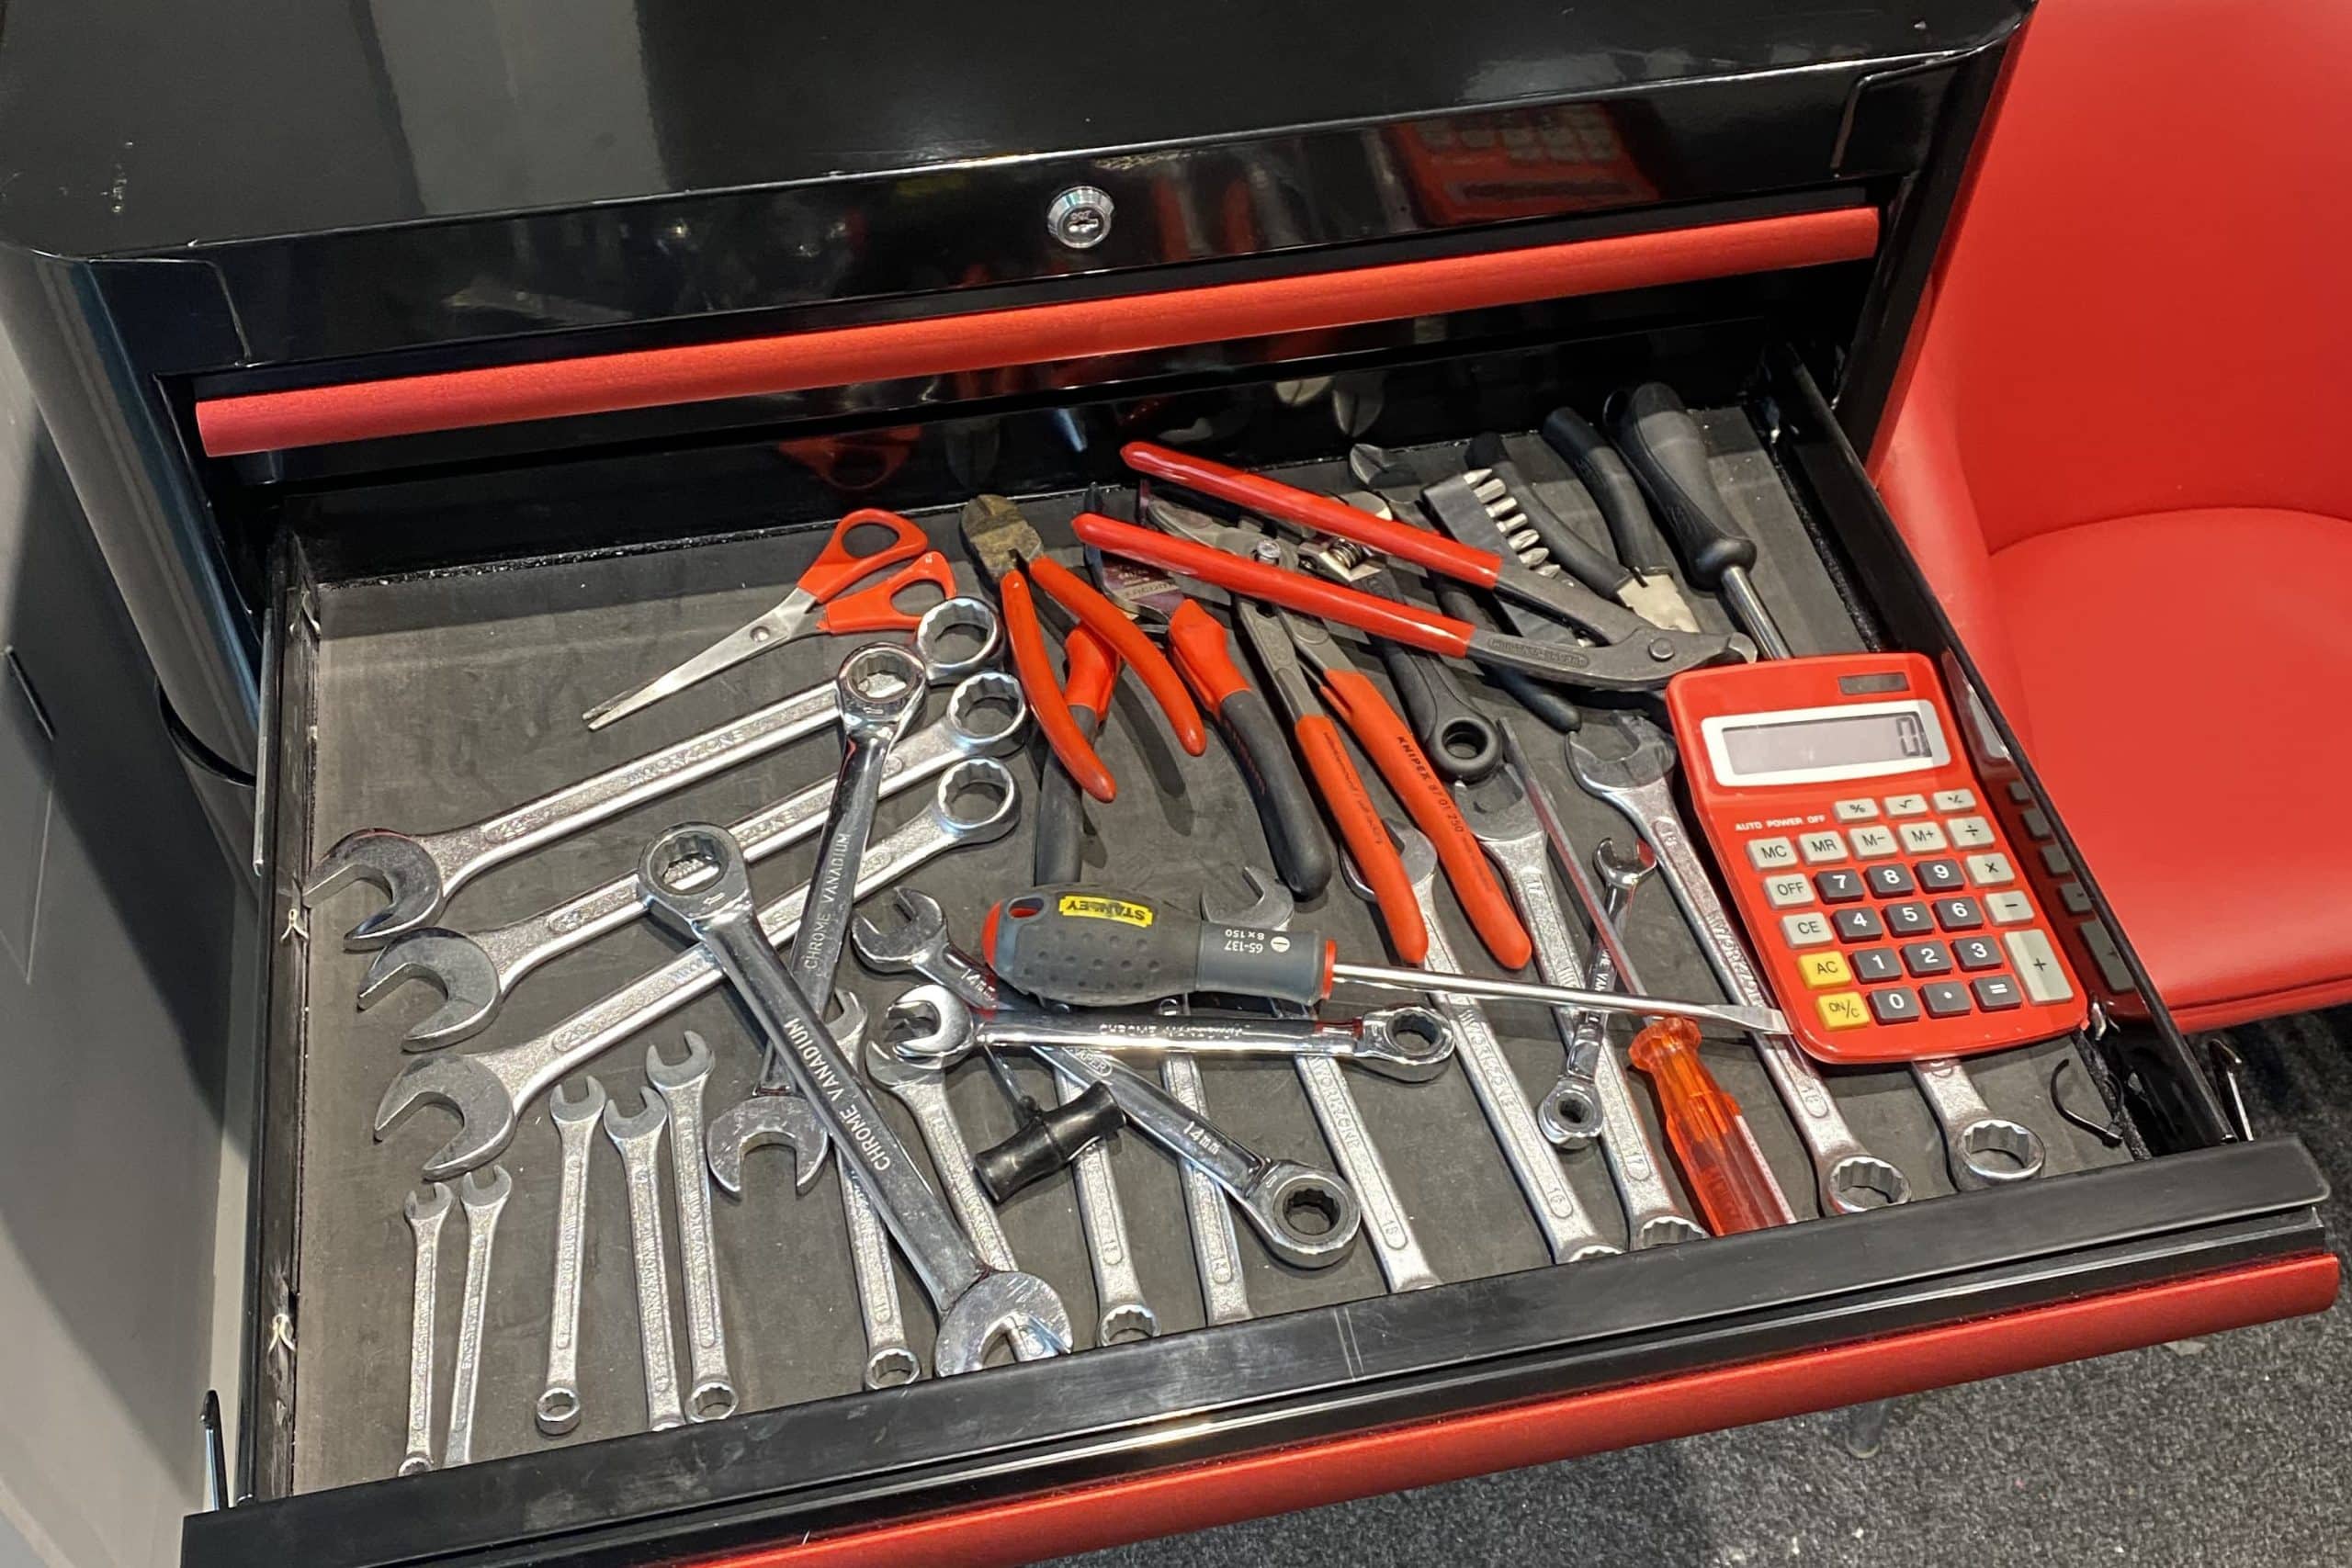 The picture shows a sealey retro tool box with many tools inside, however the tools are all over the place, no placement, no organisation and you could easily lose a tool with this style of organisation